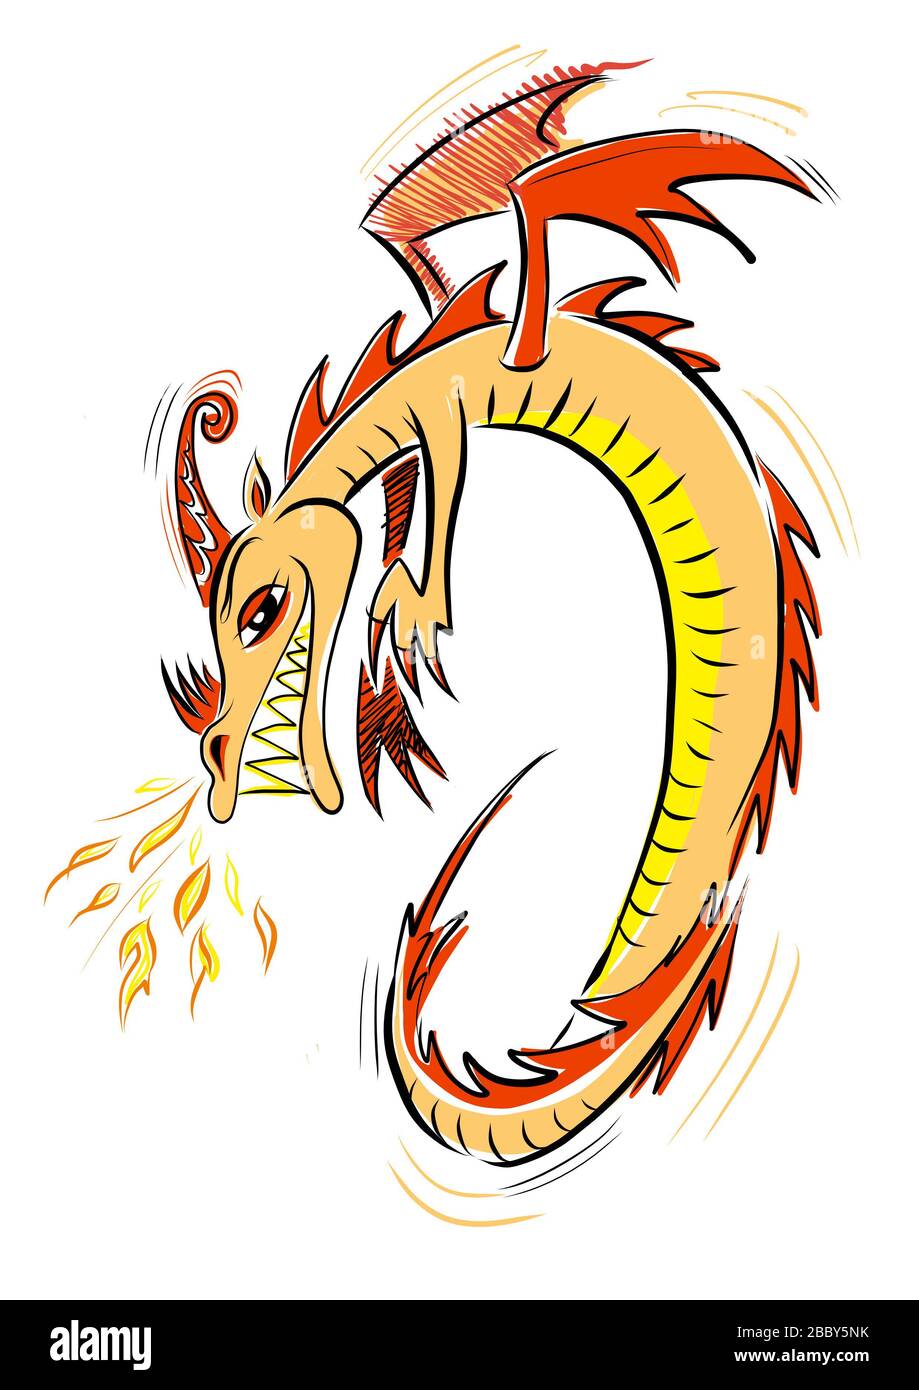 Cartoon illustration of a red and gold dragon breathing gold fire. Serpent like and represents the Chinese astrology sign of the dragon, serpent Stock Photo